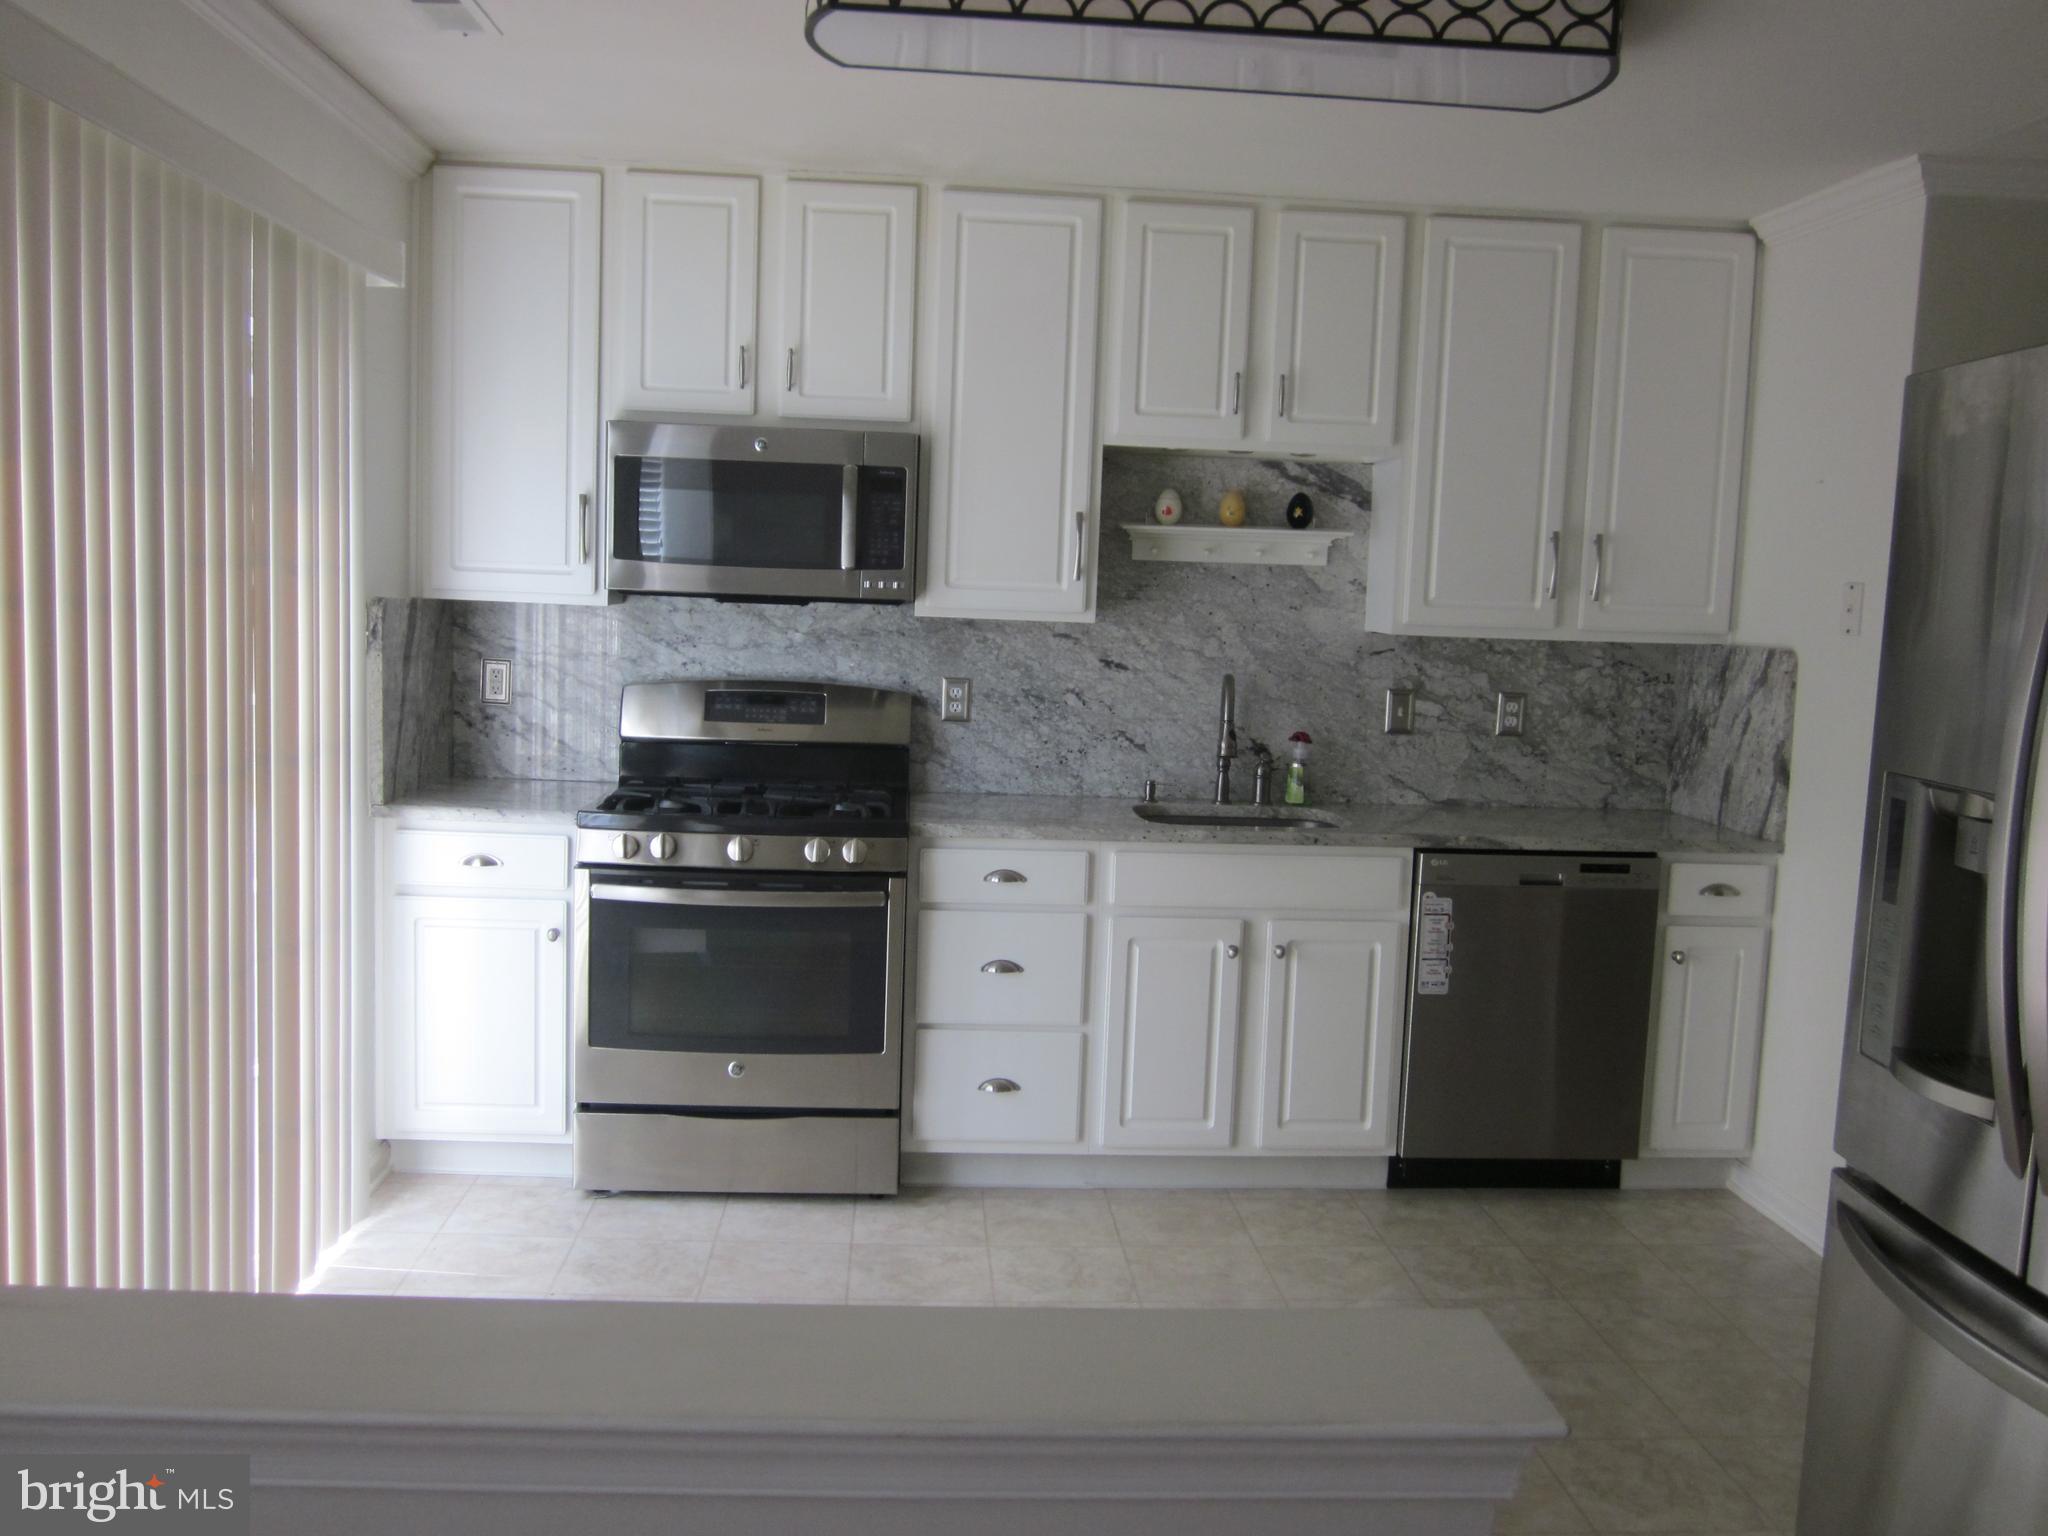 a kitchen with stainless steel appliances white cabinets and a stove a oven with white countertops